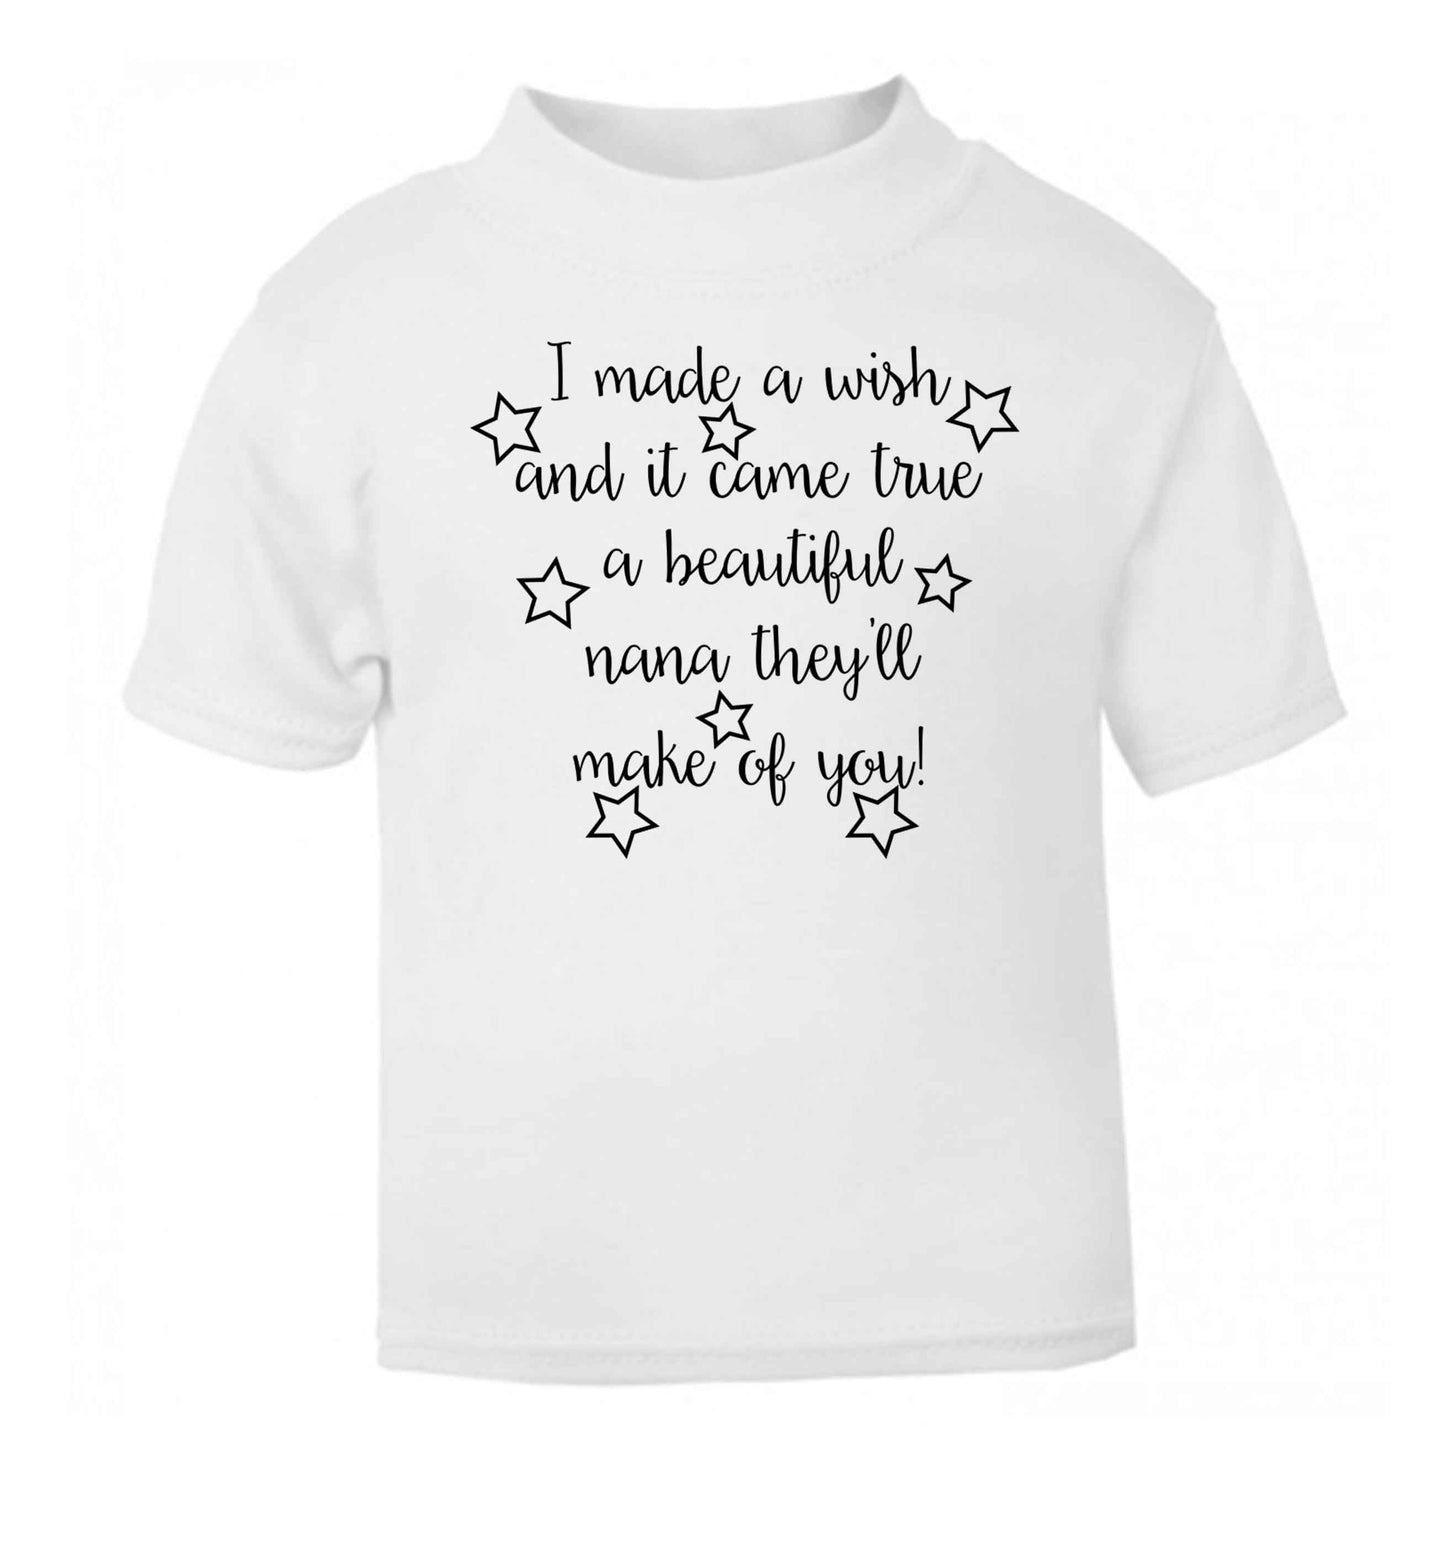 I made a wish and it came true a beautiful nana they'll make of you! white Baby Toddler Tshirt 2 Years